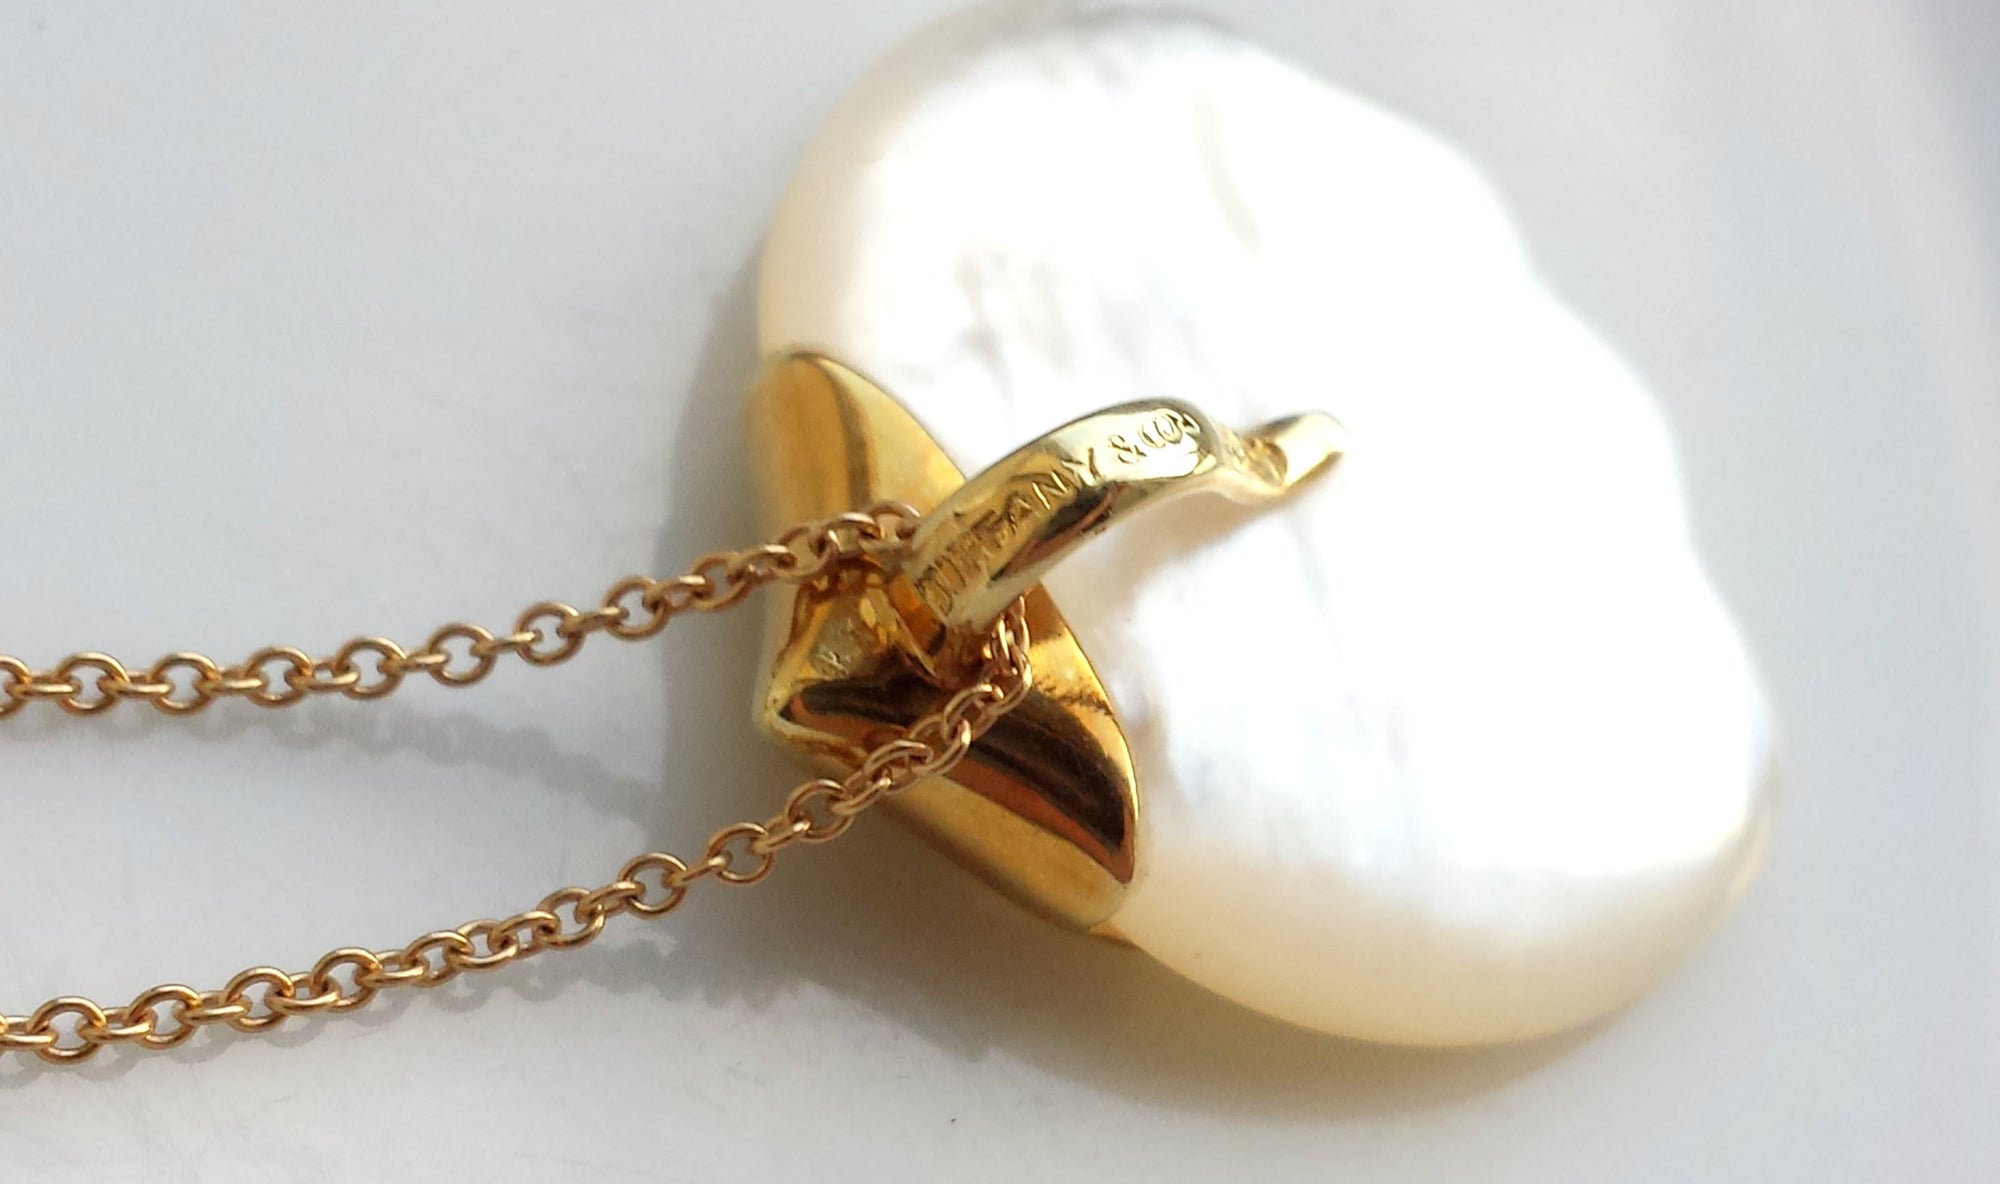 Vintage Tiffany & Co. Angela Cummings Mother of Pearl Lilly Pendant / Necklace in 18K Yellow Gold